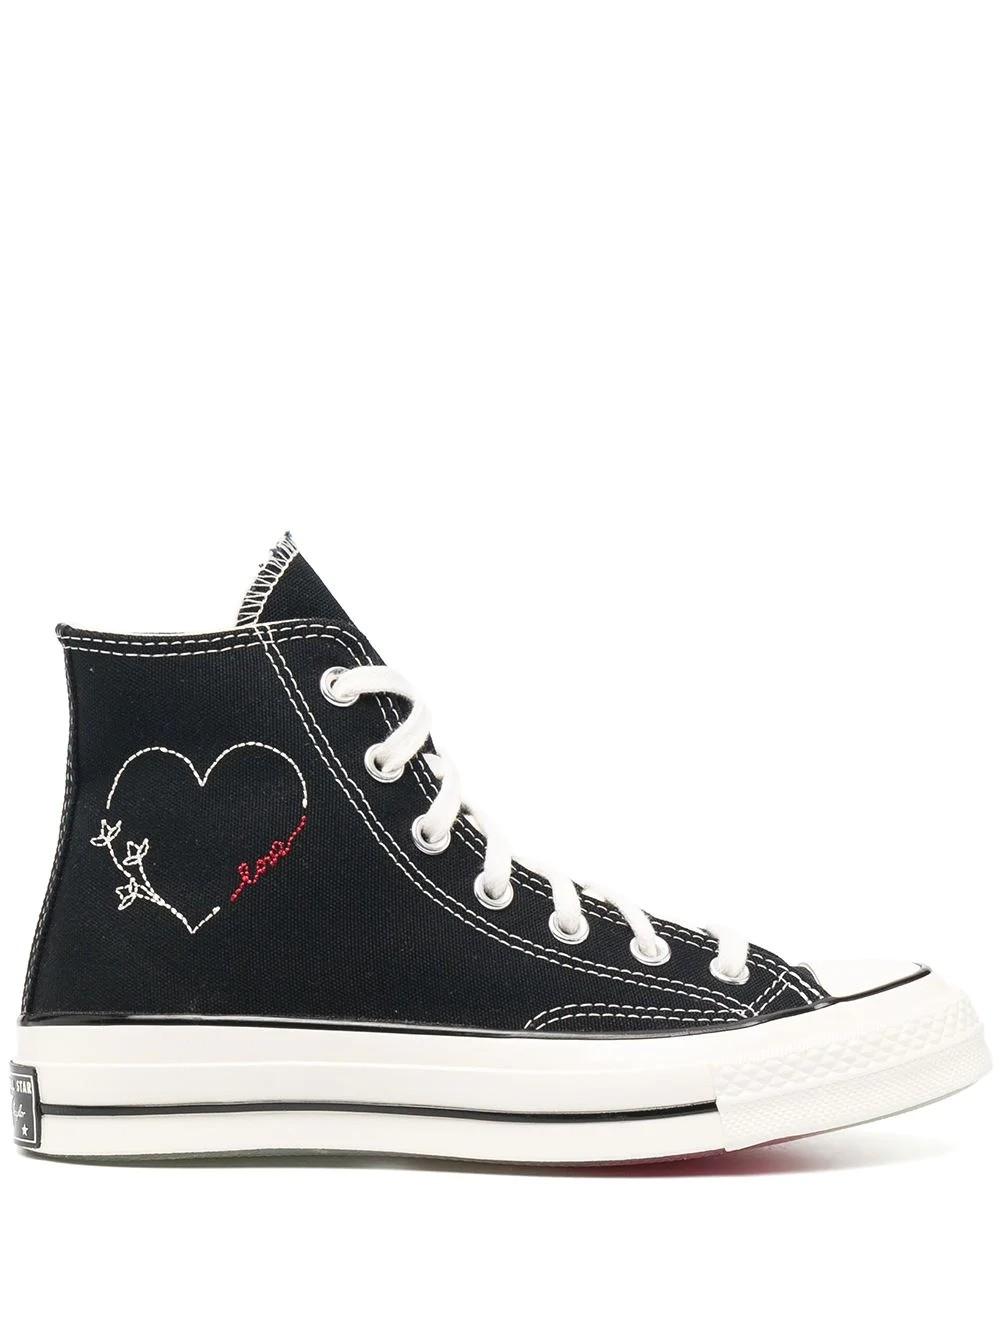 Top 43+ images black high top heart converse - In.thptnganamst.edu.vn